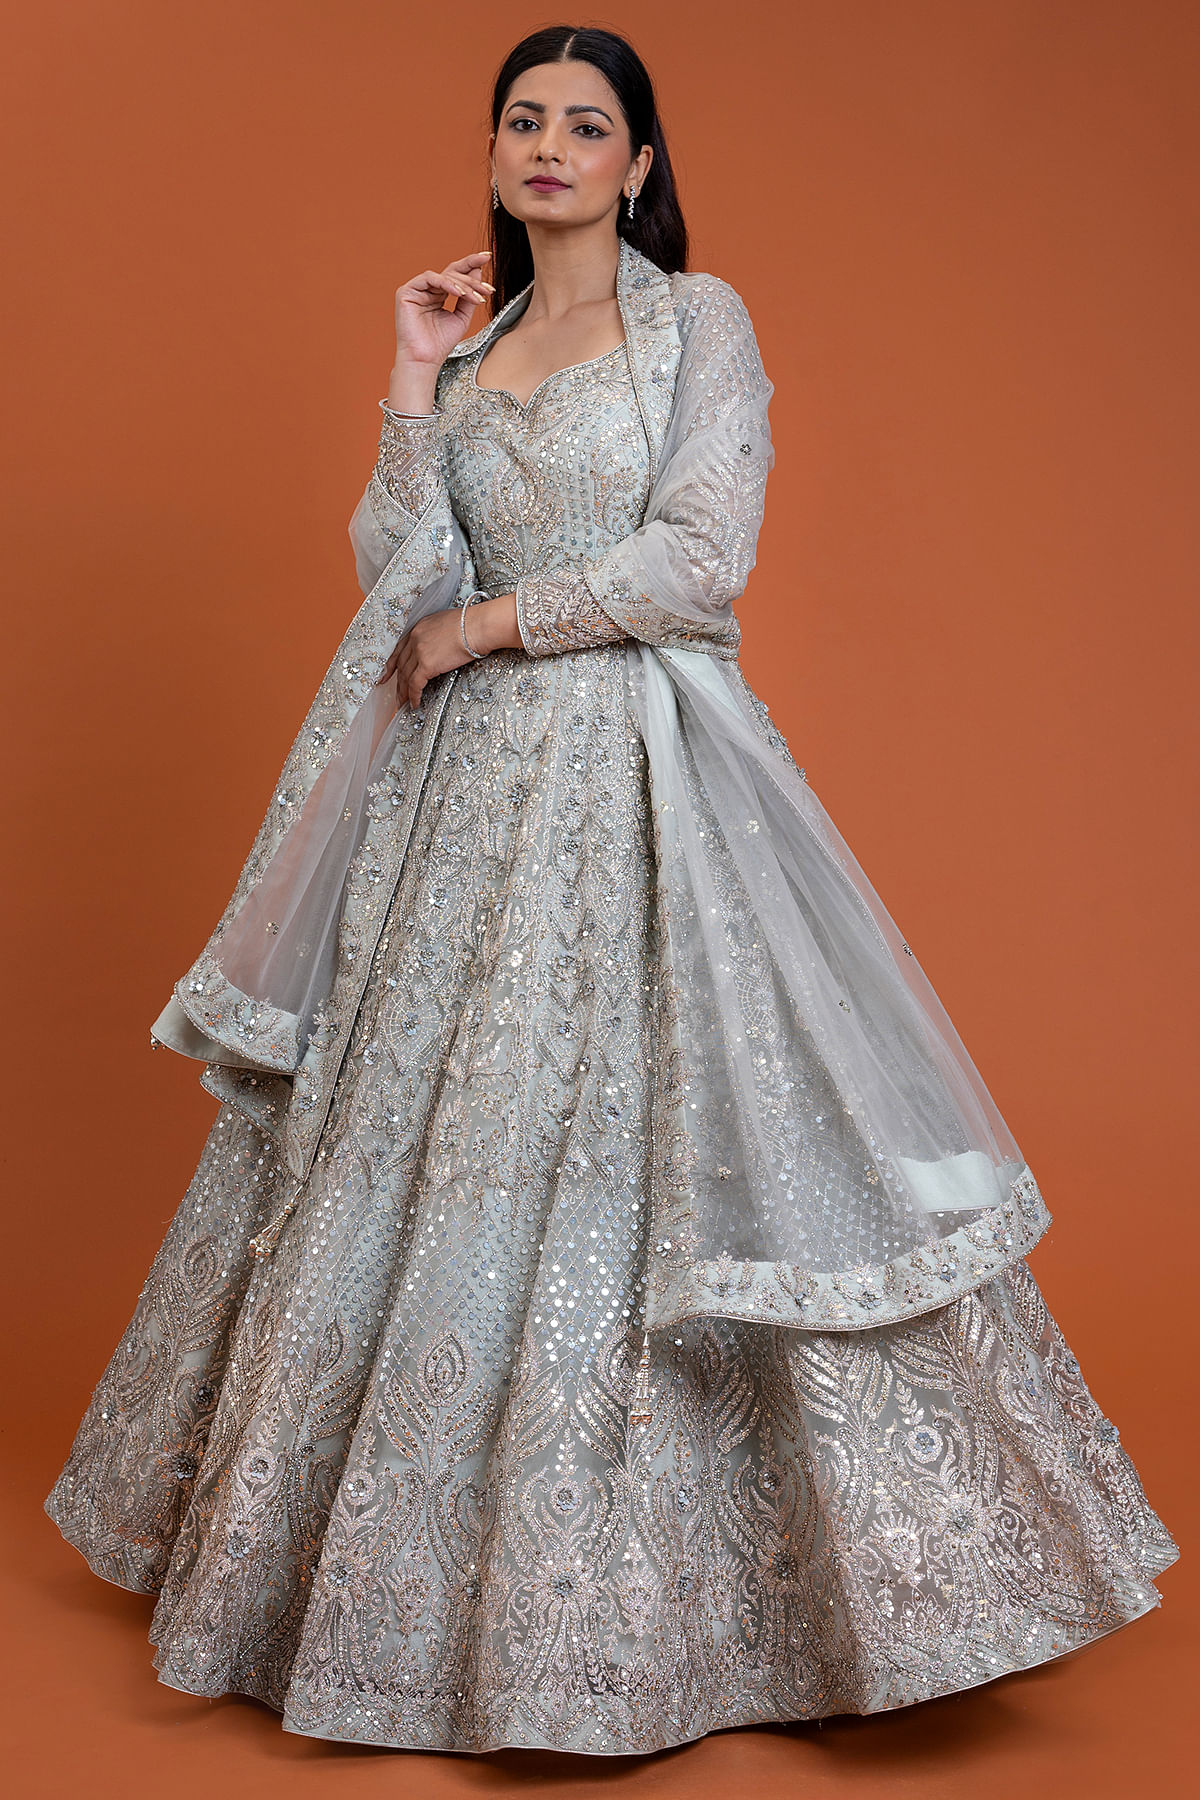 party gowns, wedding gowns, designer gowns, Indo-western gowns, and  floor-length gowns Gowns for women Designer gowns Party wear gowns Wedding  gowns Long gowns Gowns online Indo western gowns Bollywood style gowns  Embroidered